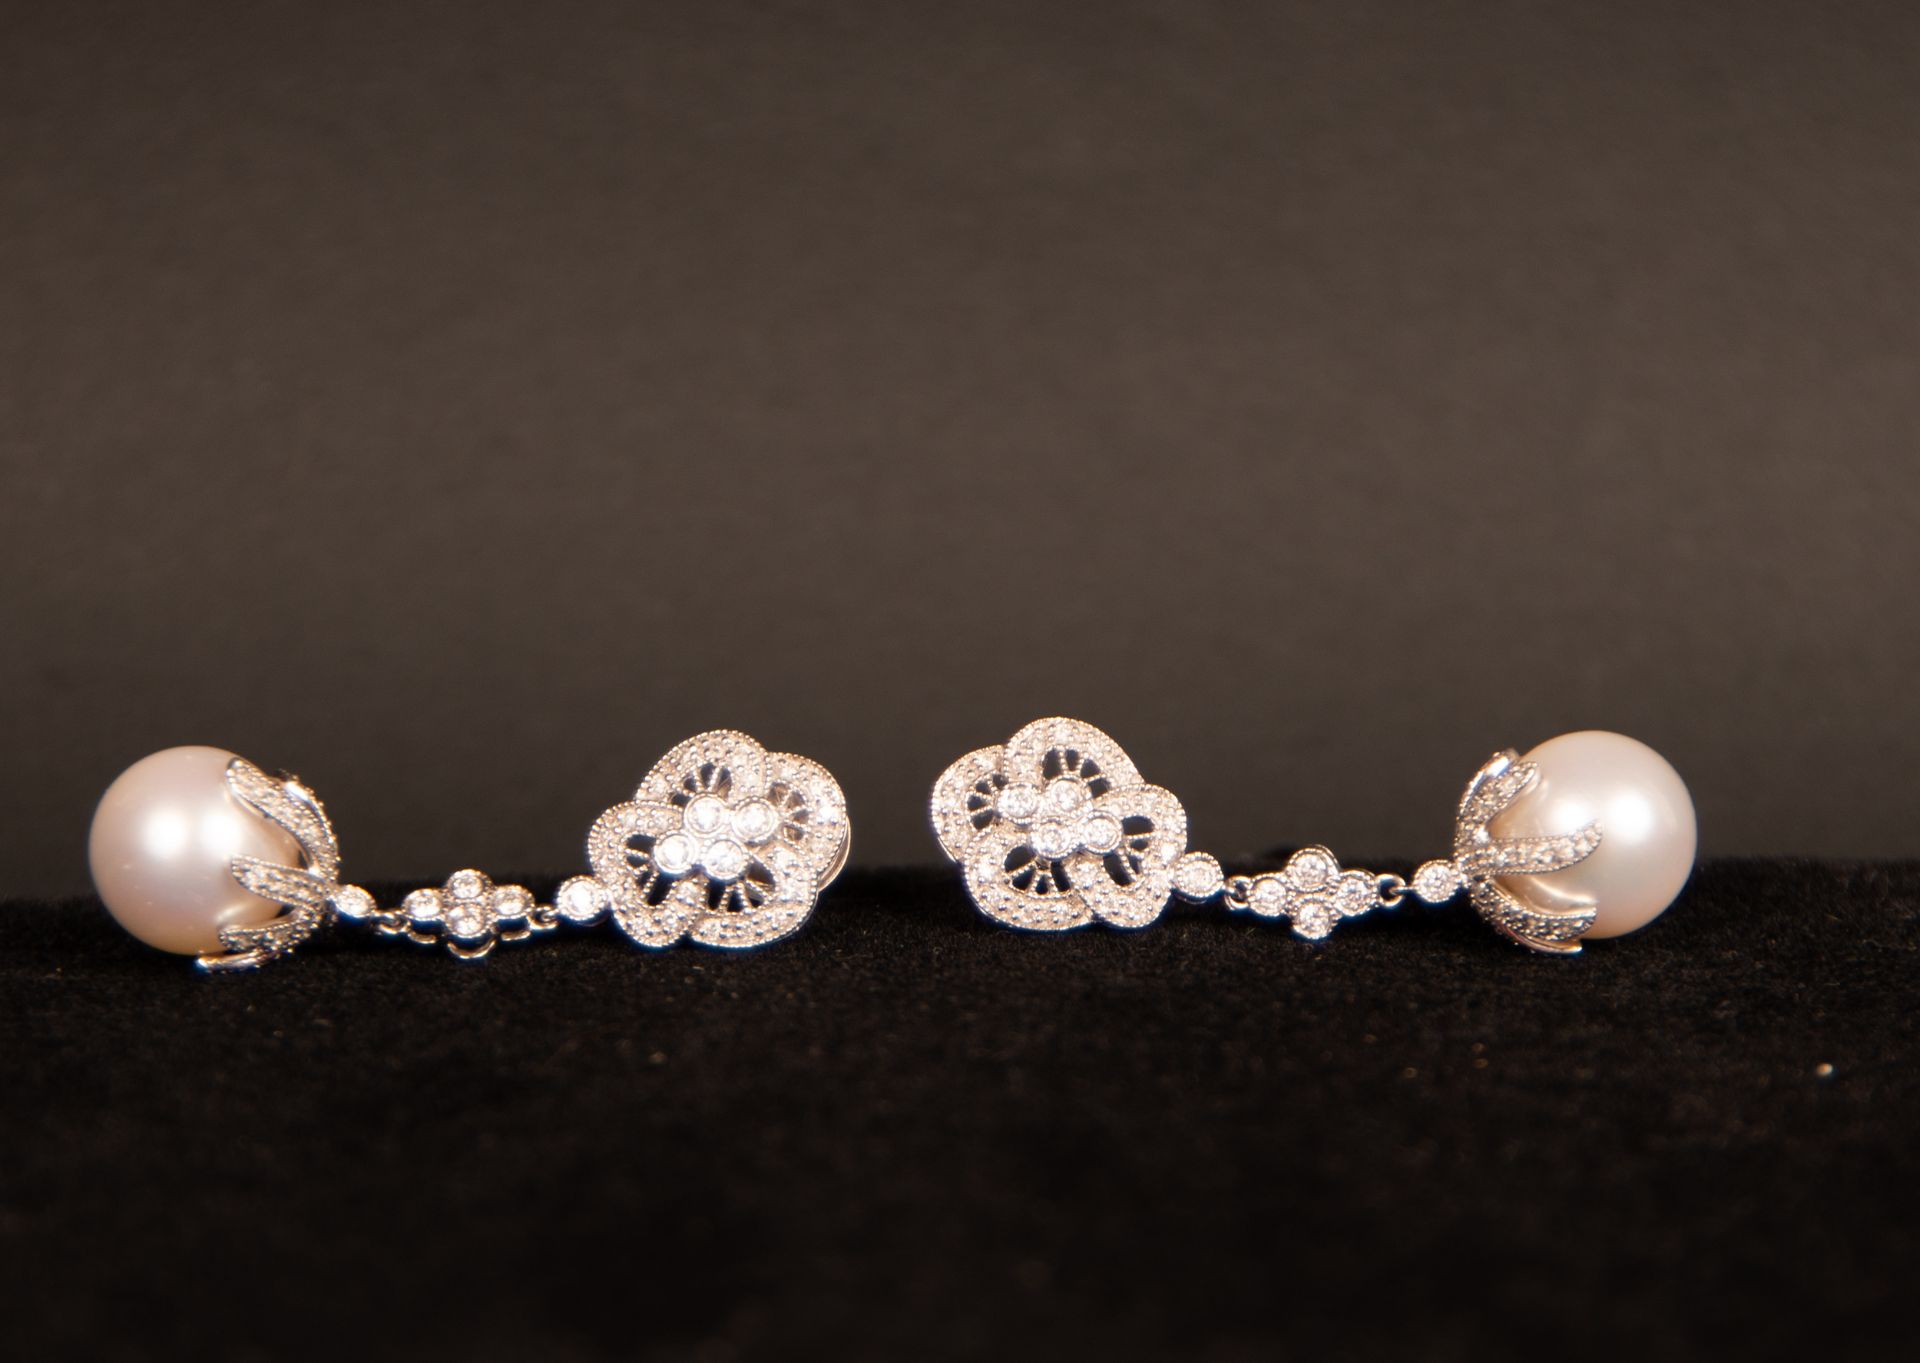 Pair of Clover-shaped Earrings with Crimped Pearls